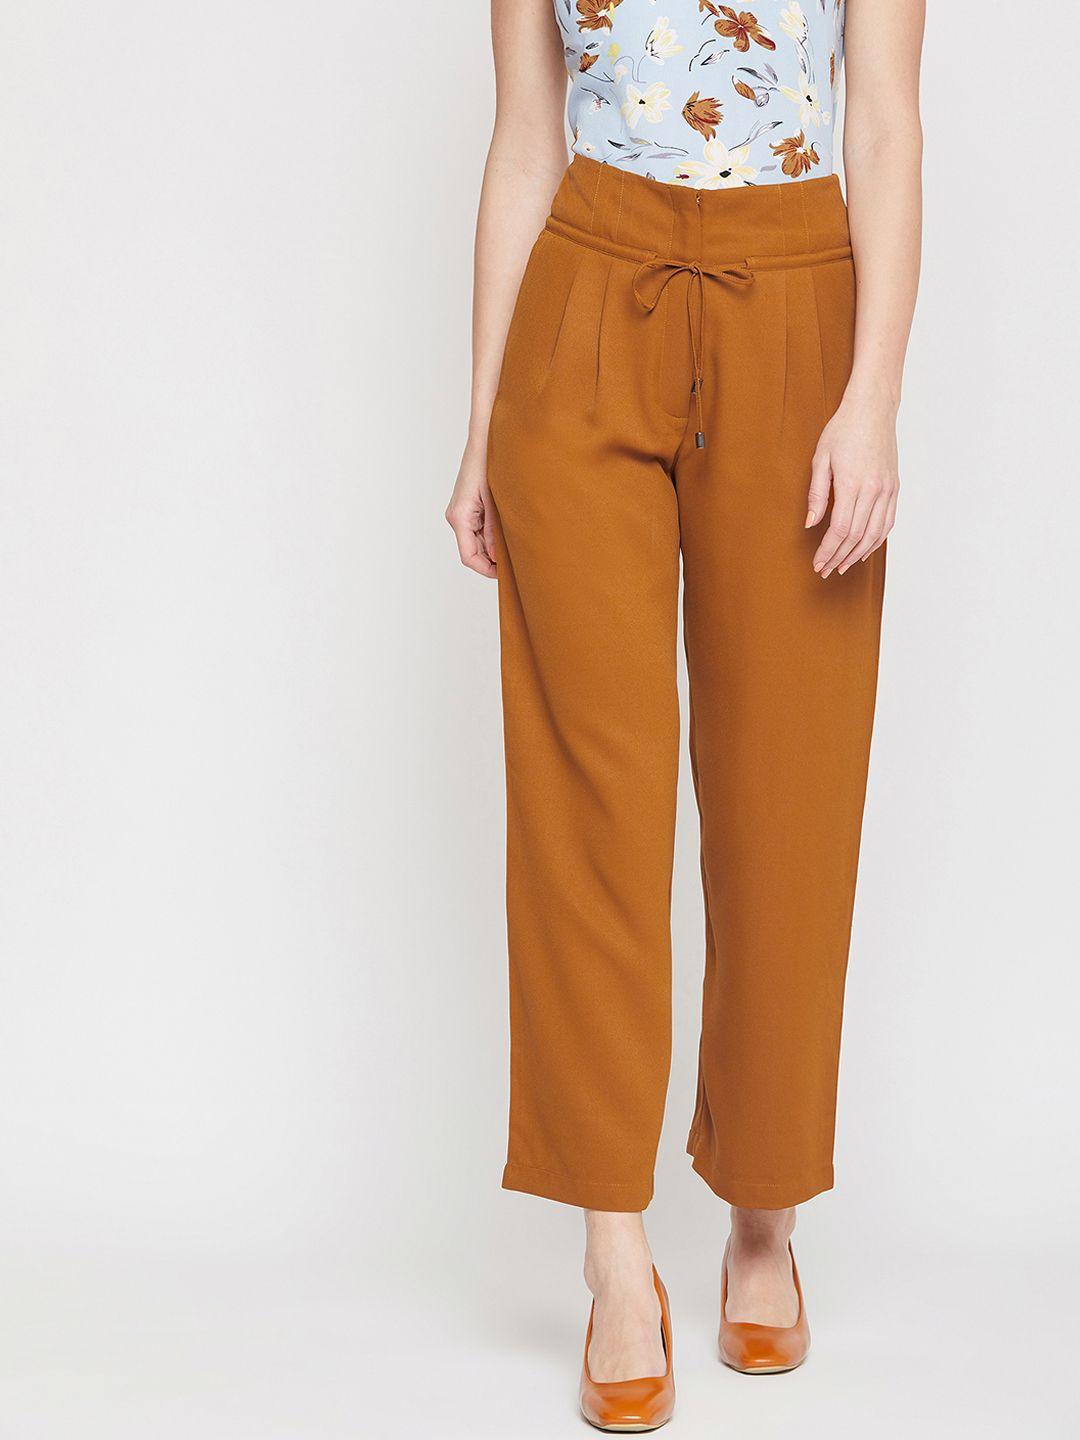 marie claire women mustard yellow straight fit solid parallel trousers